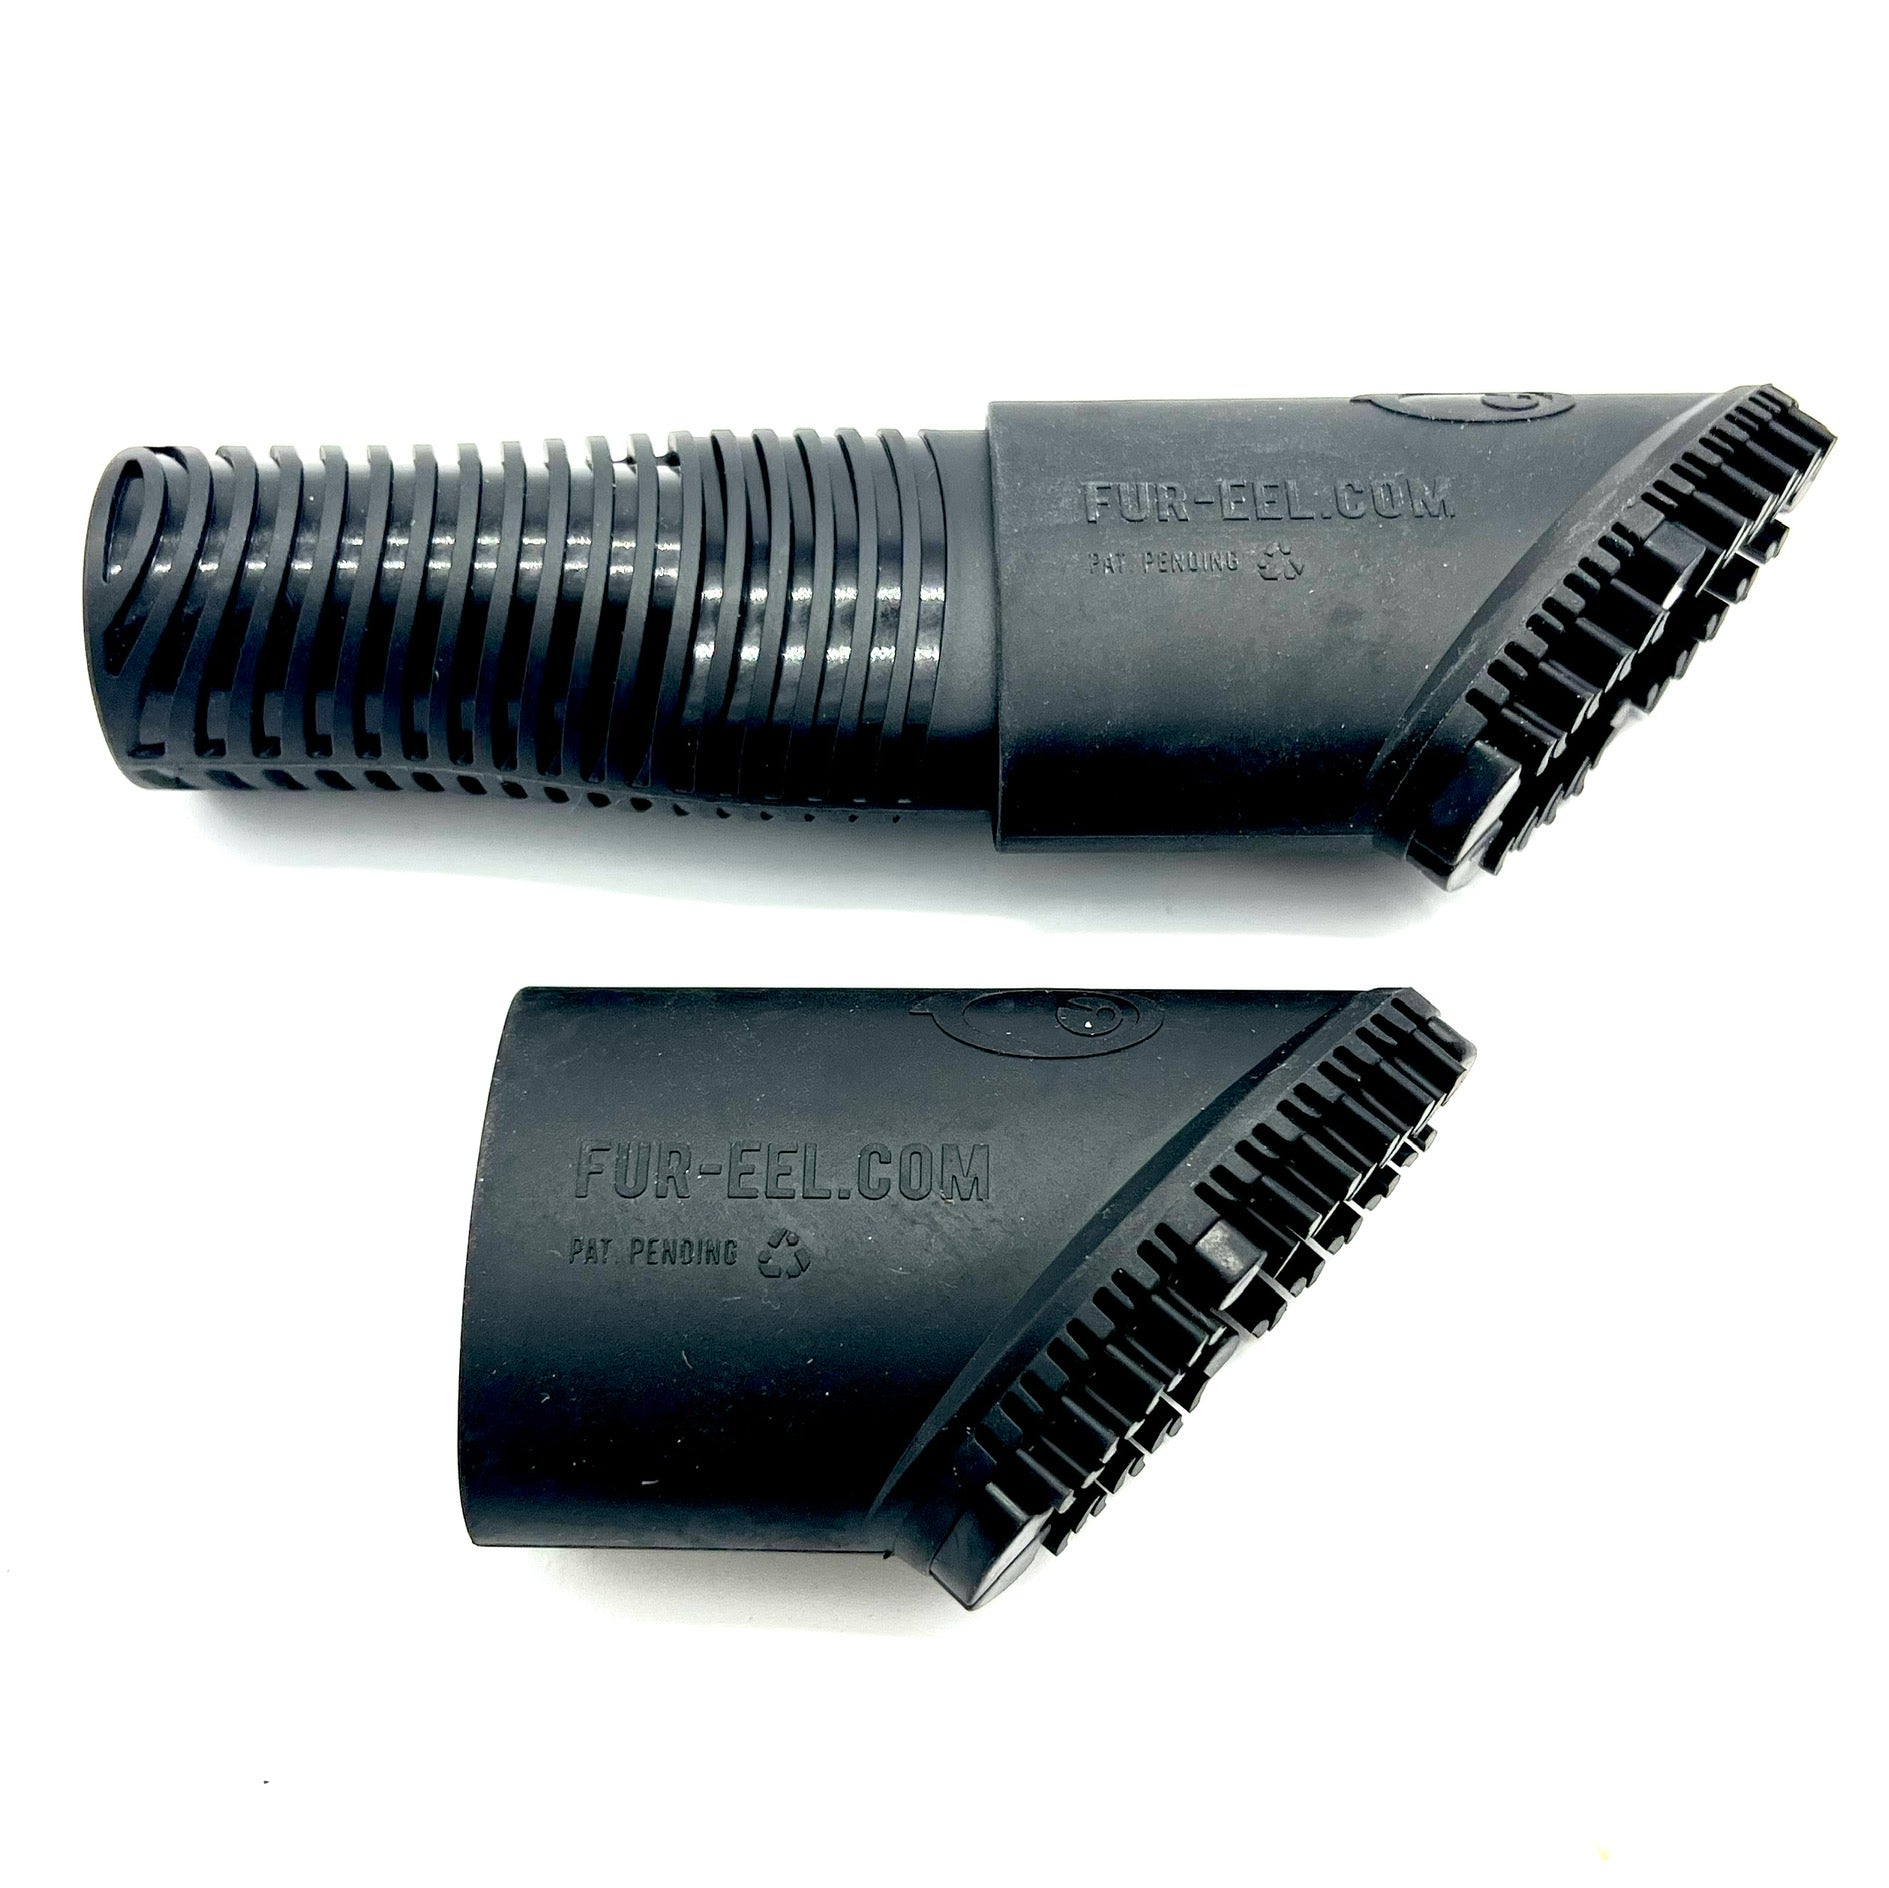 The adapter and second Fur-eel Pro.